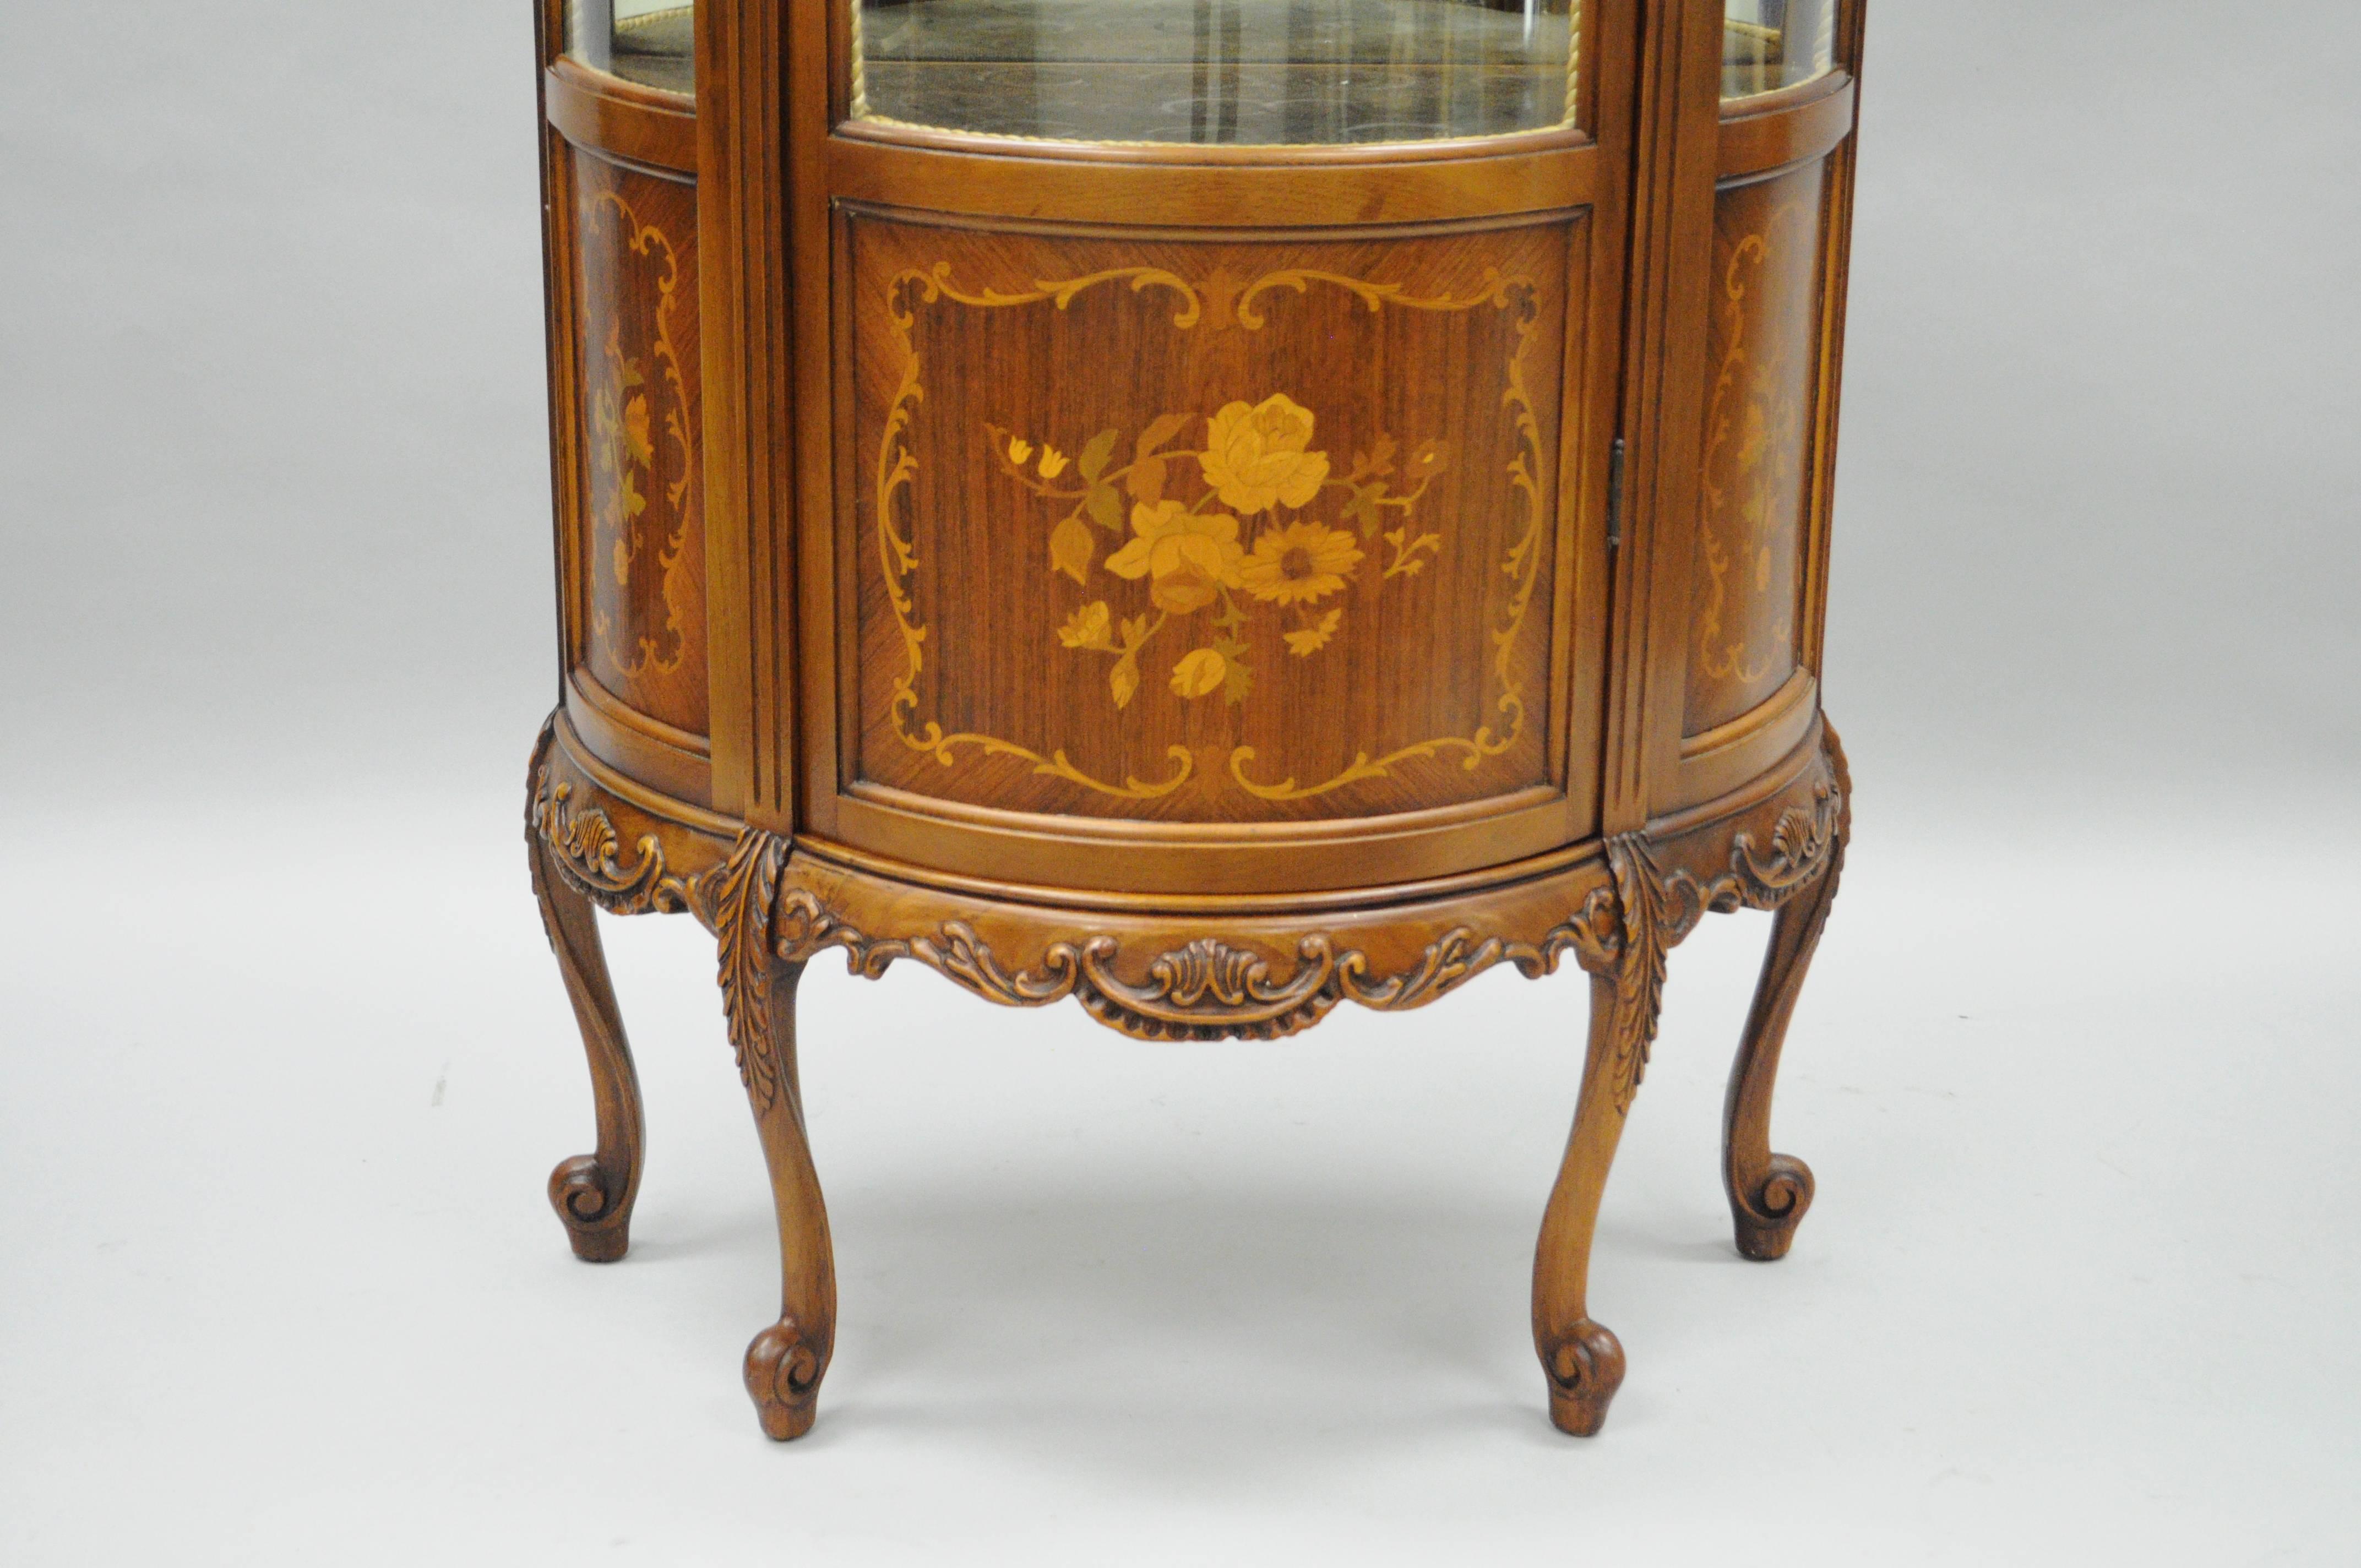 Vintage French Louis XV style demilune Curio cabinet. Item features a carved mahogany case with satinwood floral inlays, three curved glass panels, mirror glass interior backing, two curved glass shelves, single swing door with working lock and key,